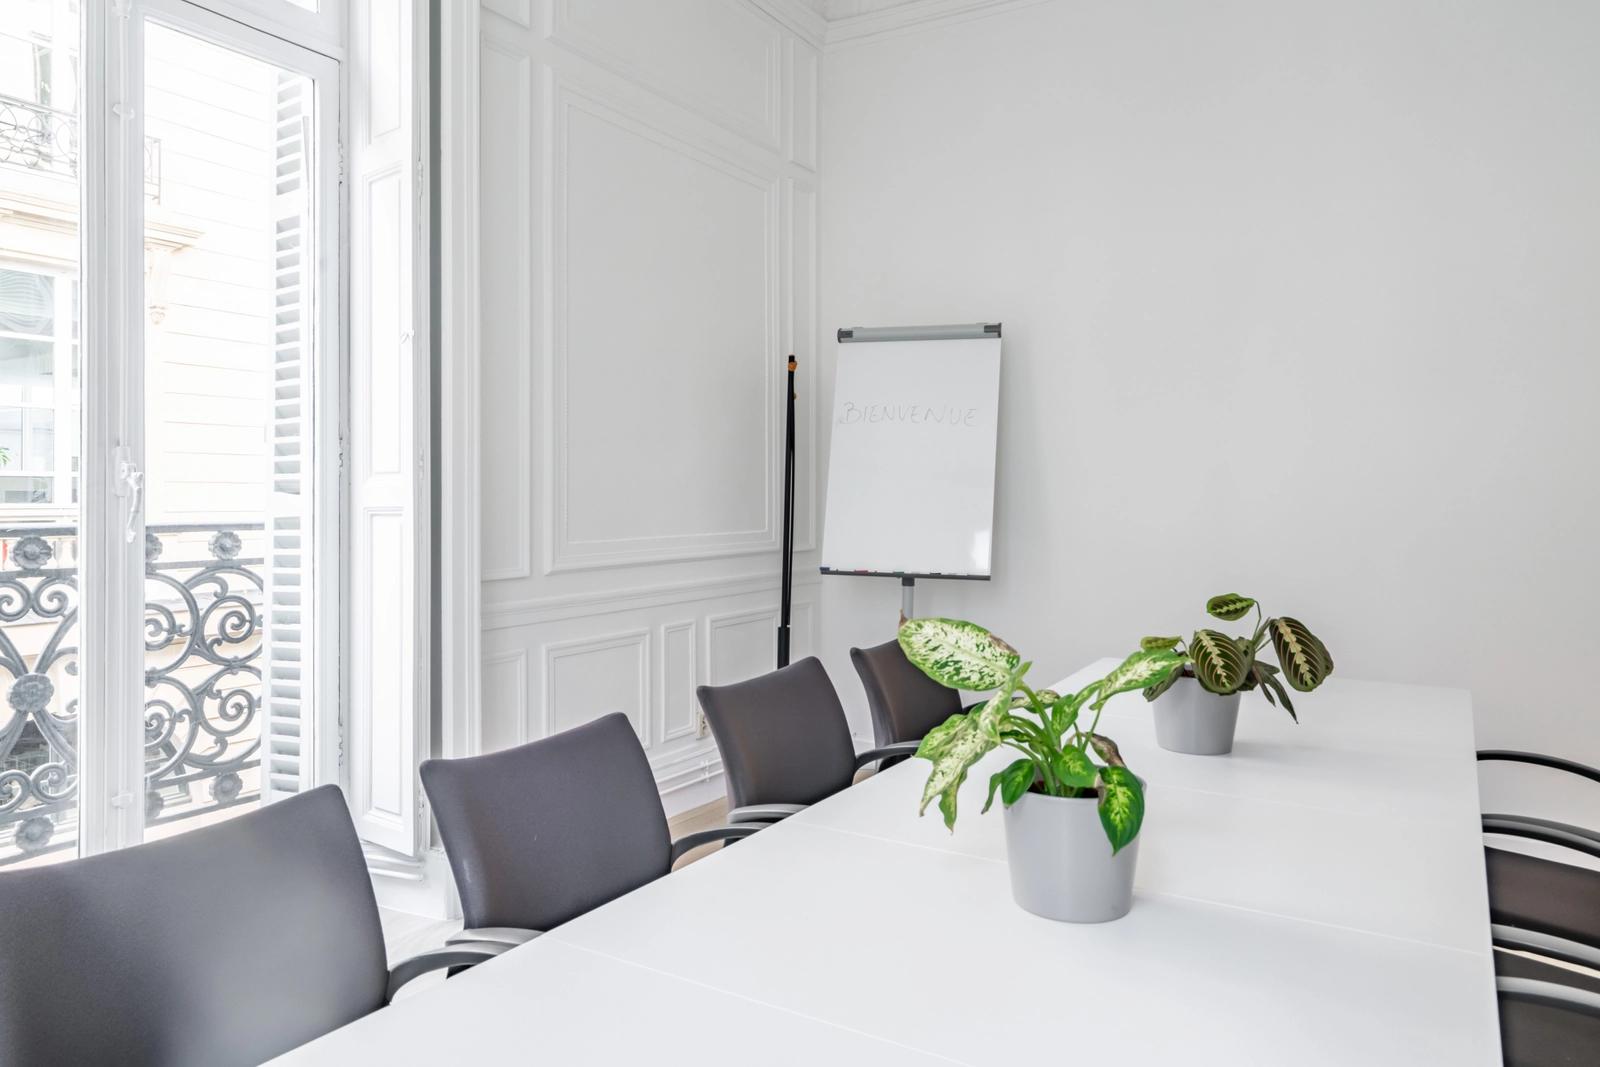 Living room in Haussmann-style meeting space - 4